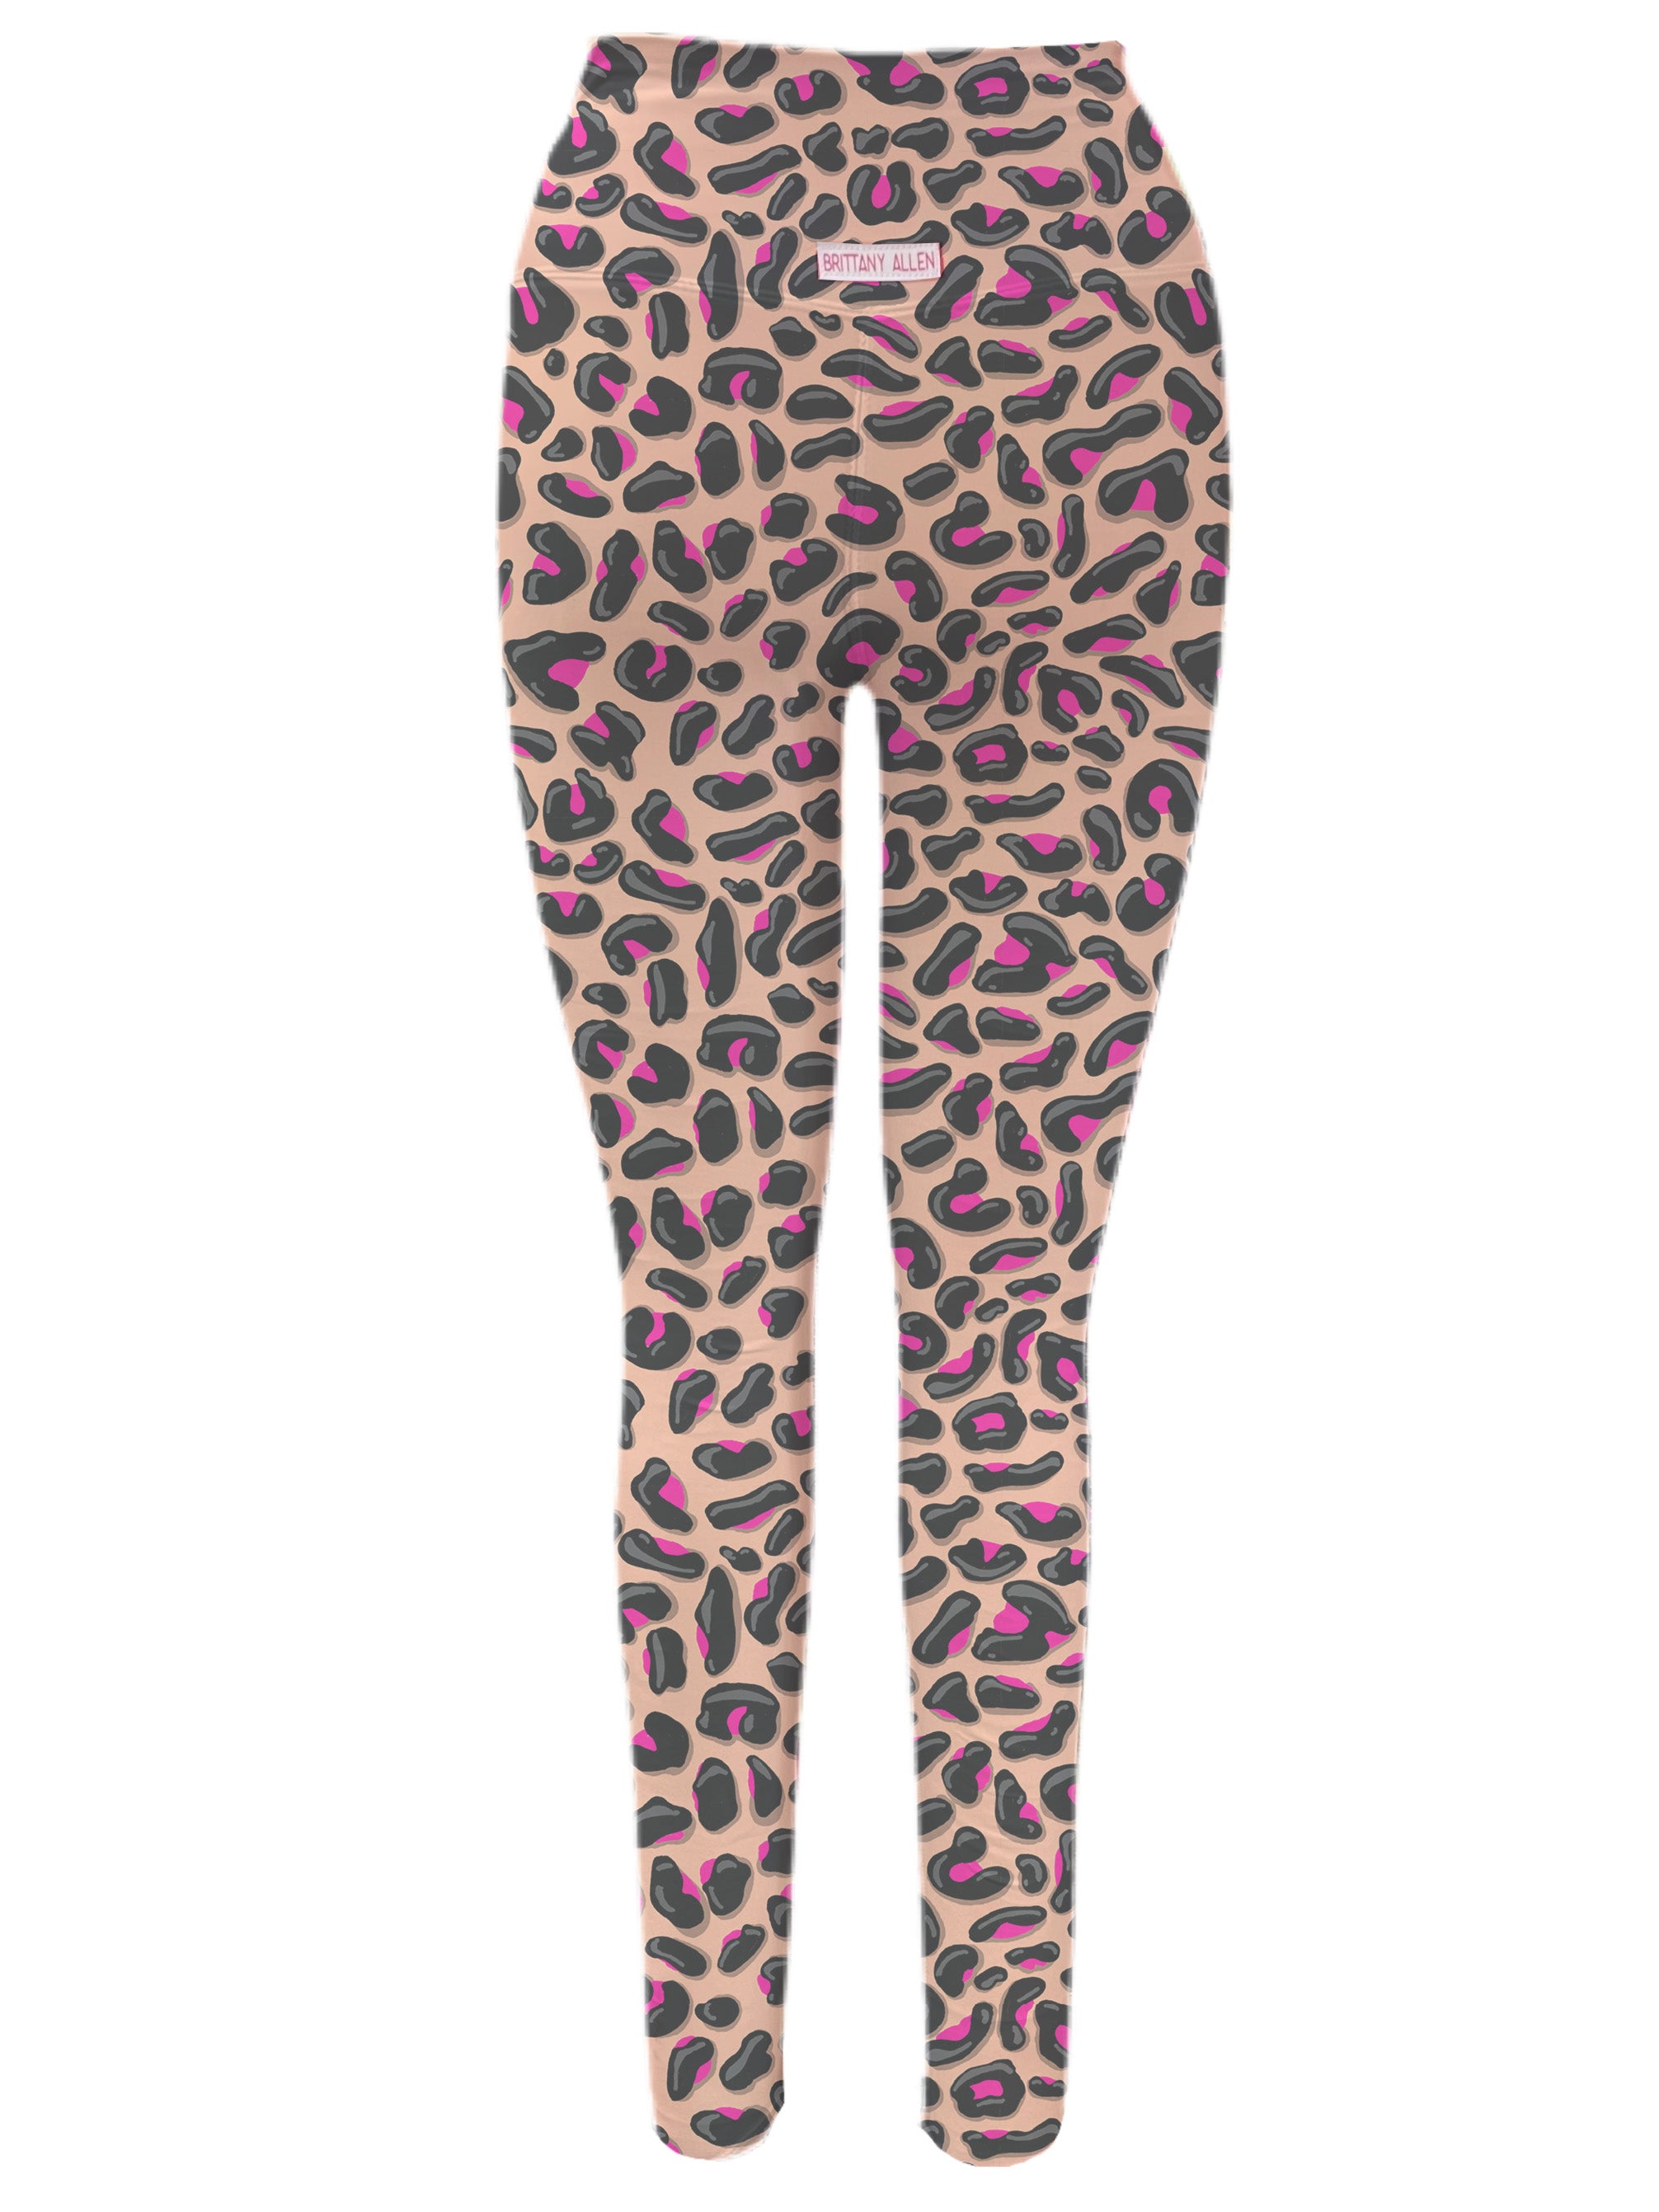 Purple And Pink Leopard Print Leggings - Free Shipping